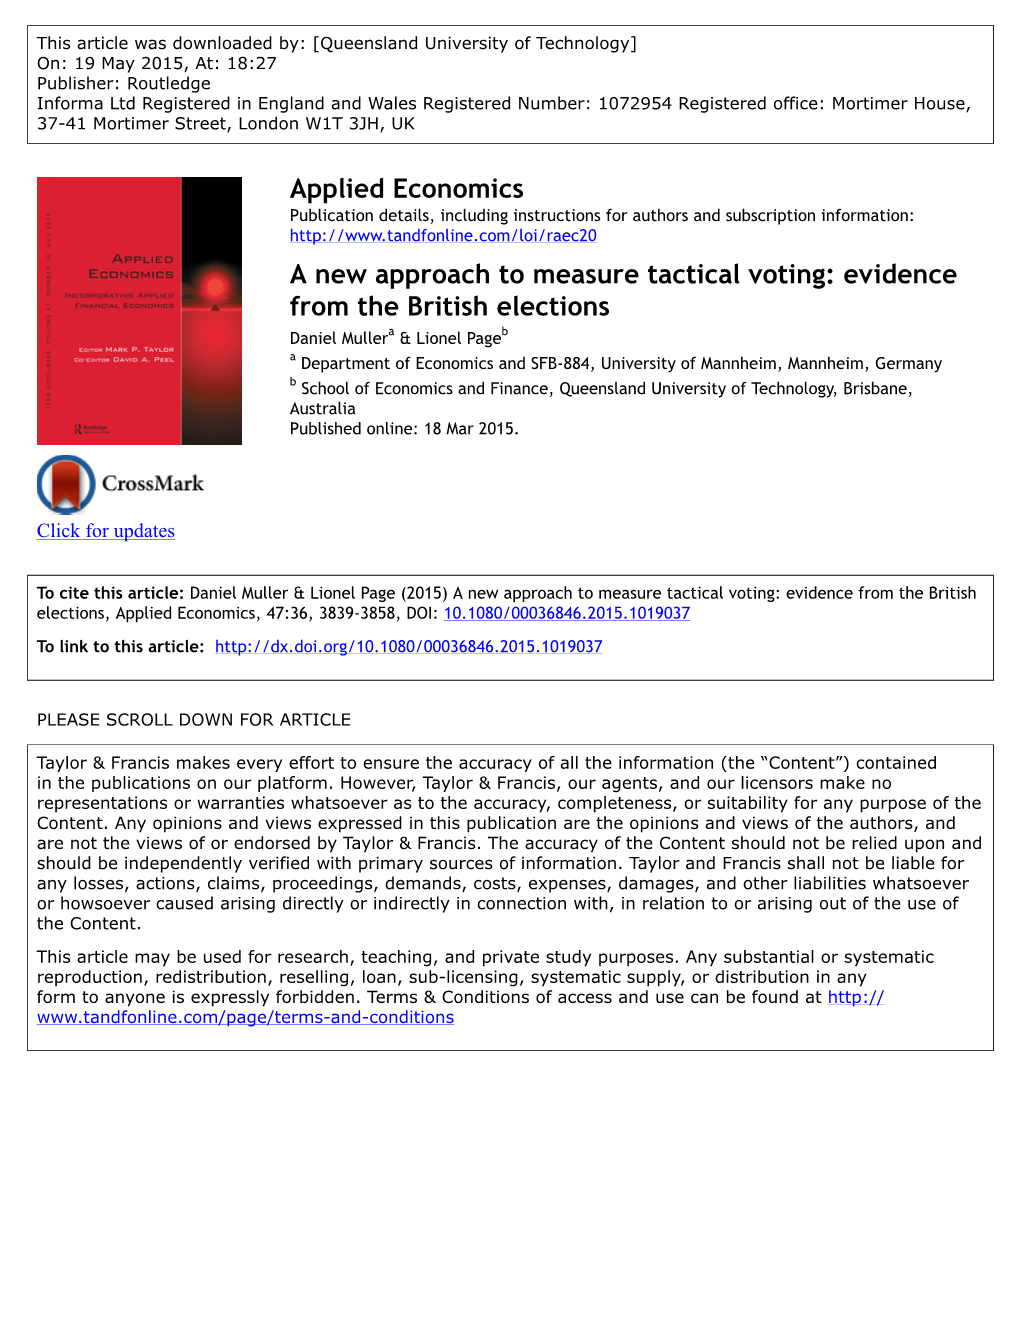 A New Approach to Measure Tactical Voting: Evidence from the British